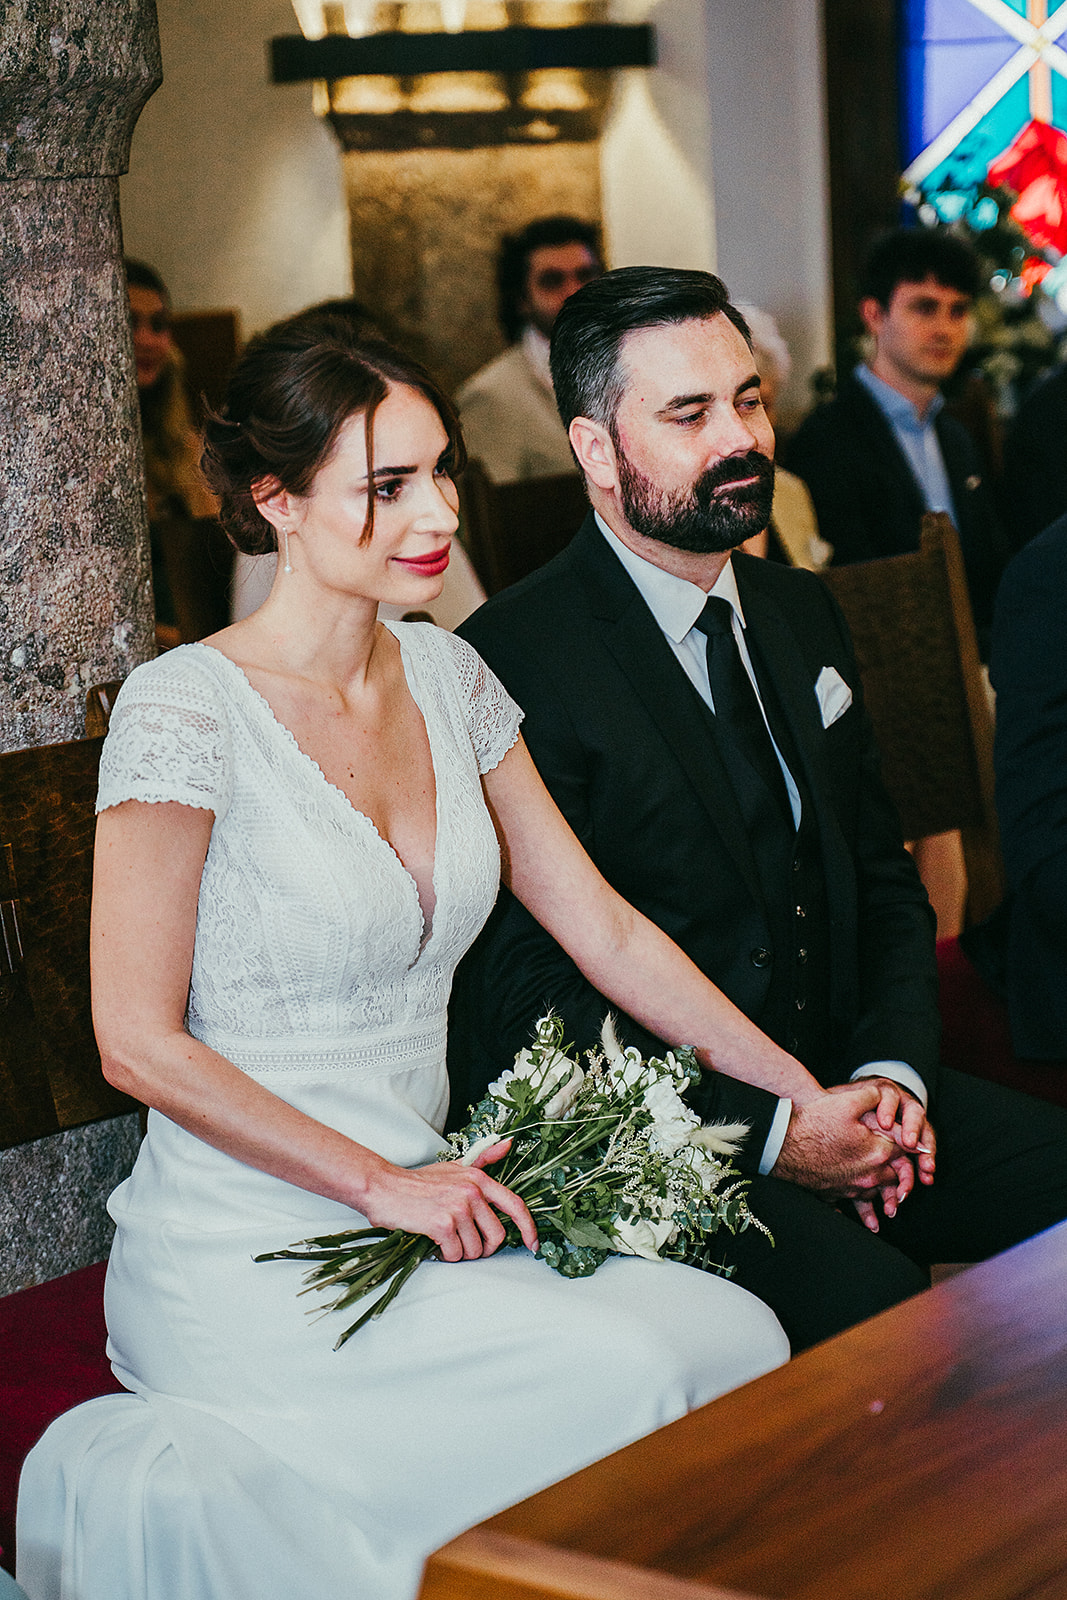 A bride and groom in the registry office for civil wedding in the city of Innsbruck in the Tyrol